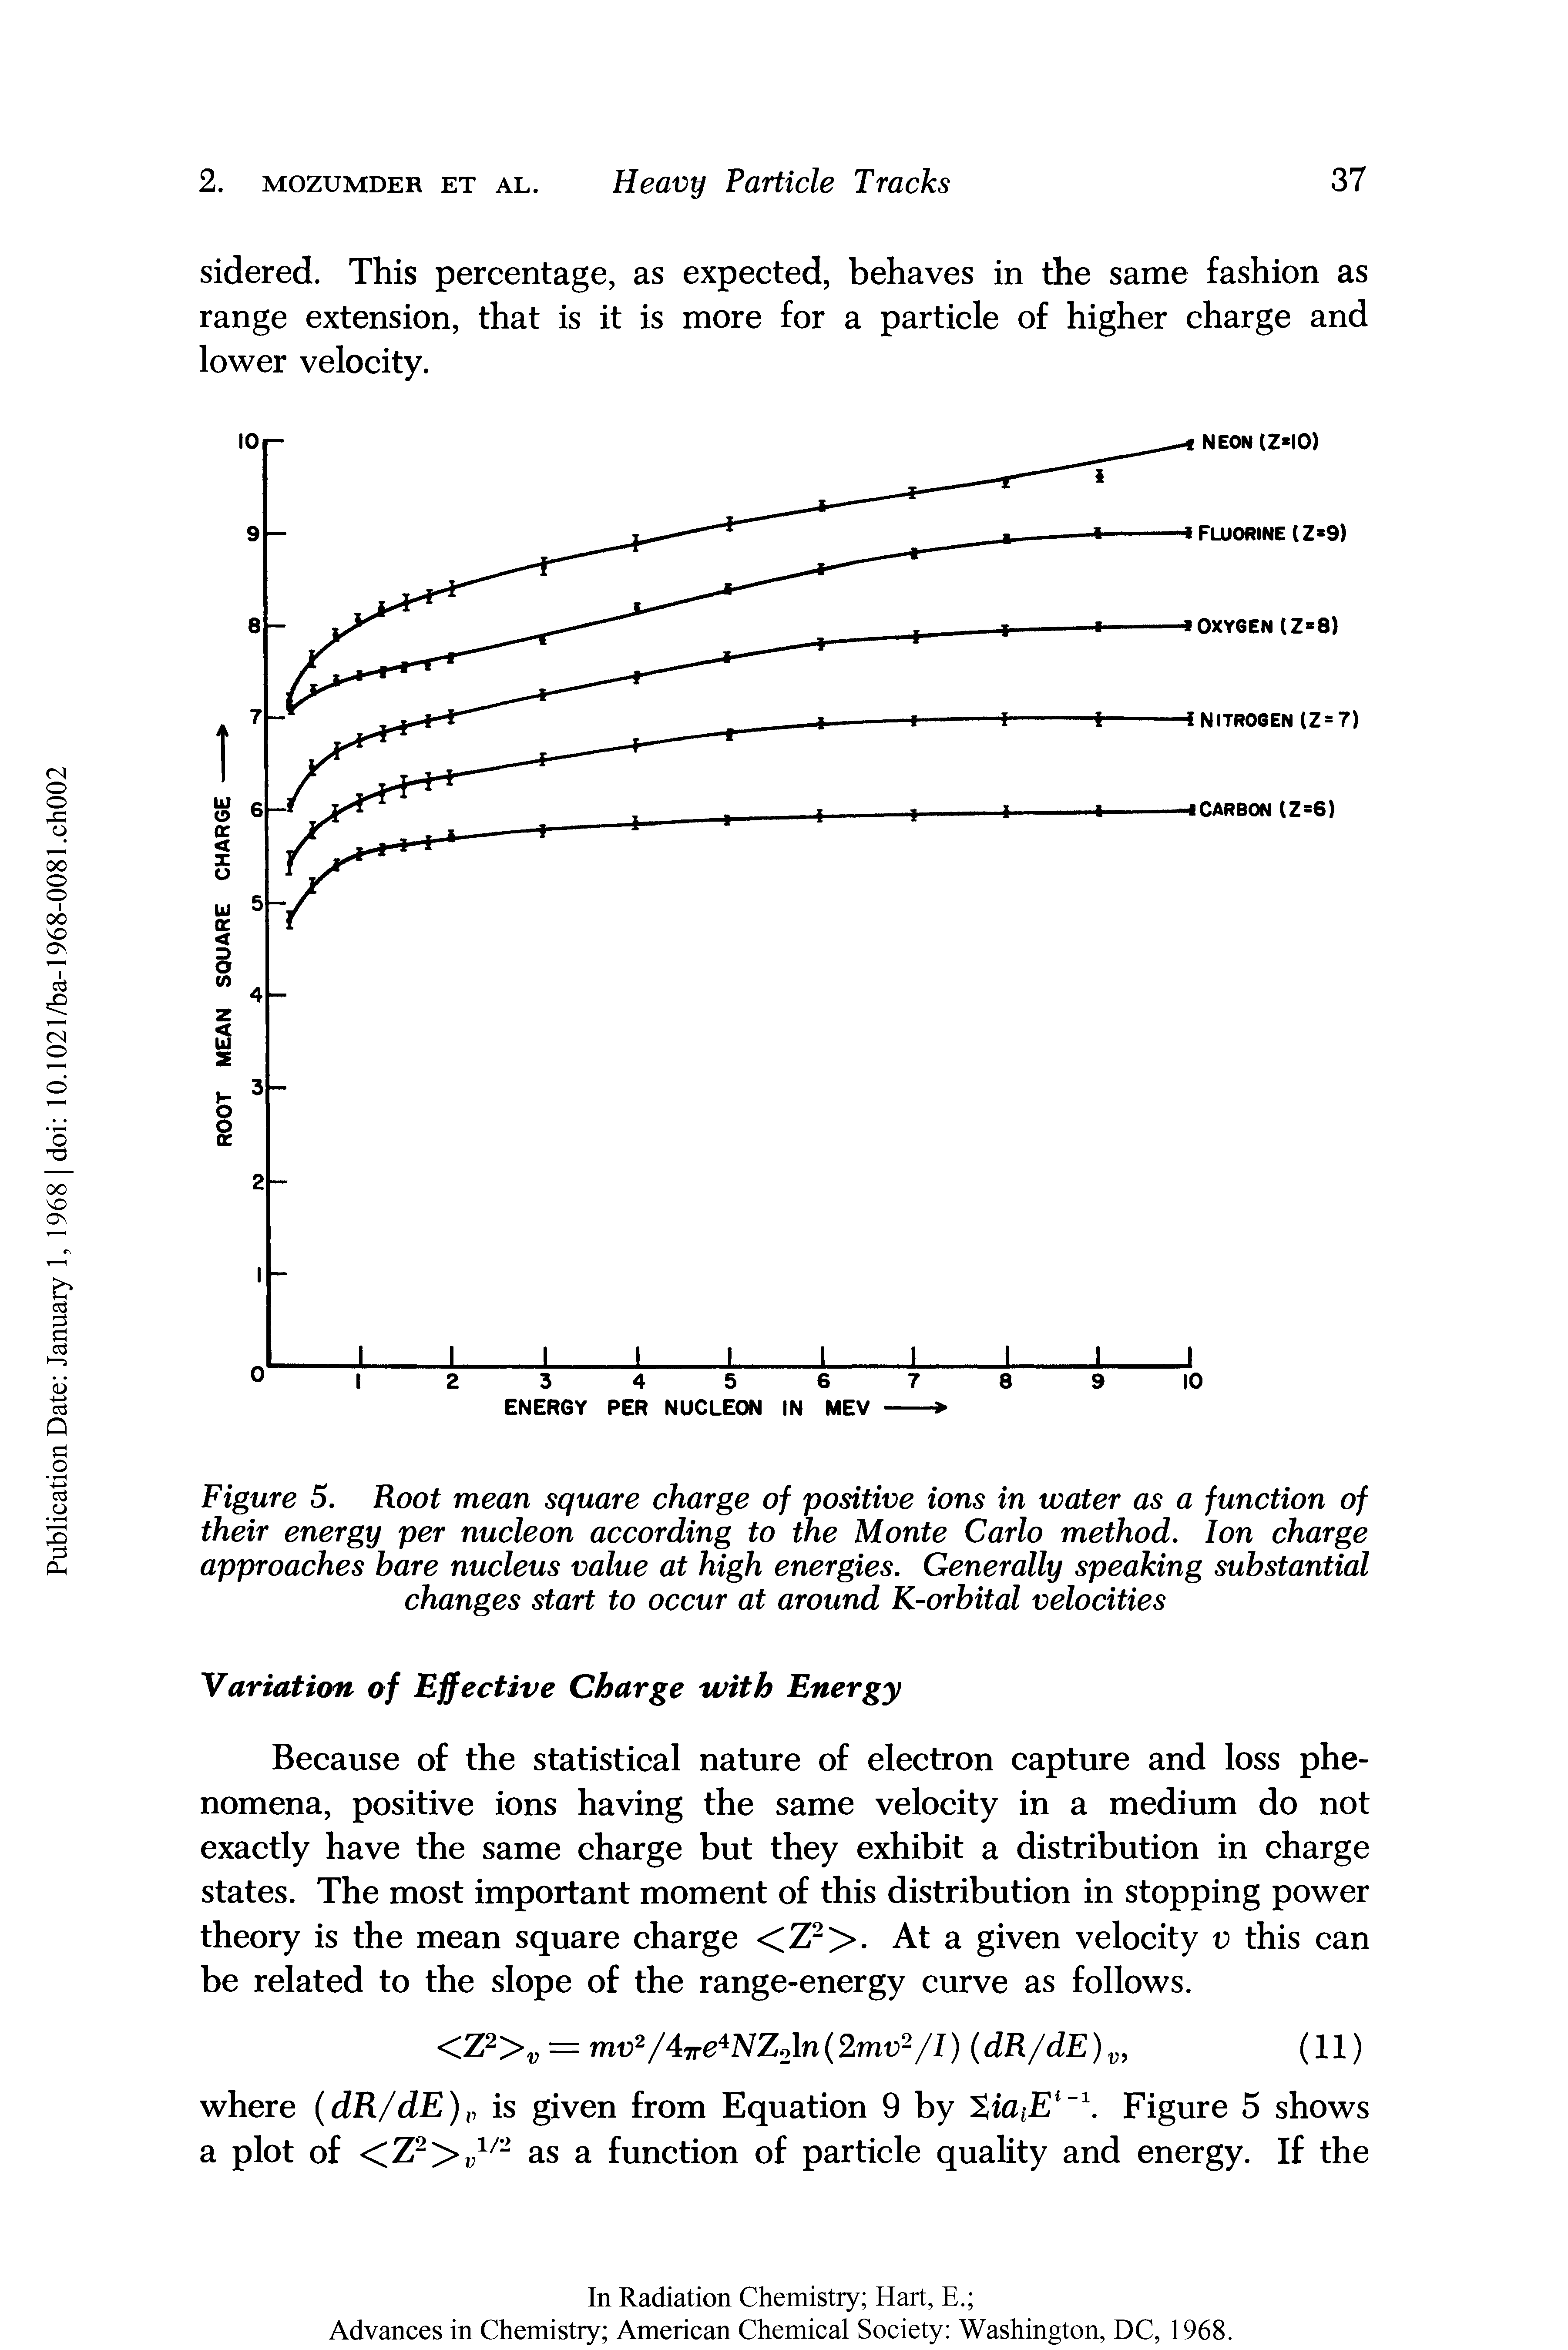 Figure 5. Root mean square charge of positive ions in water as a function of their energy per nucleon according to the Monte Carlo method. Ion charge approaches bare nucleus value at high energies. Generally speaking substantial changes start to occur at around K-orbital velocities...